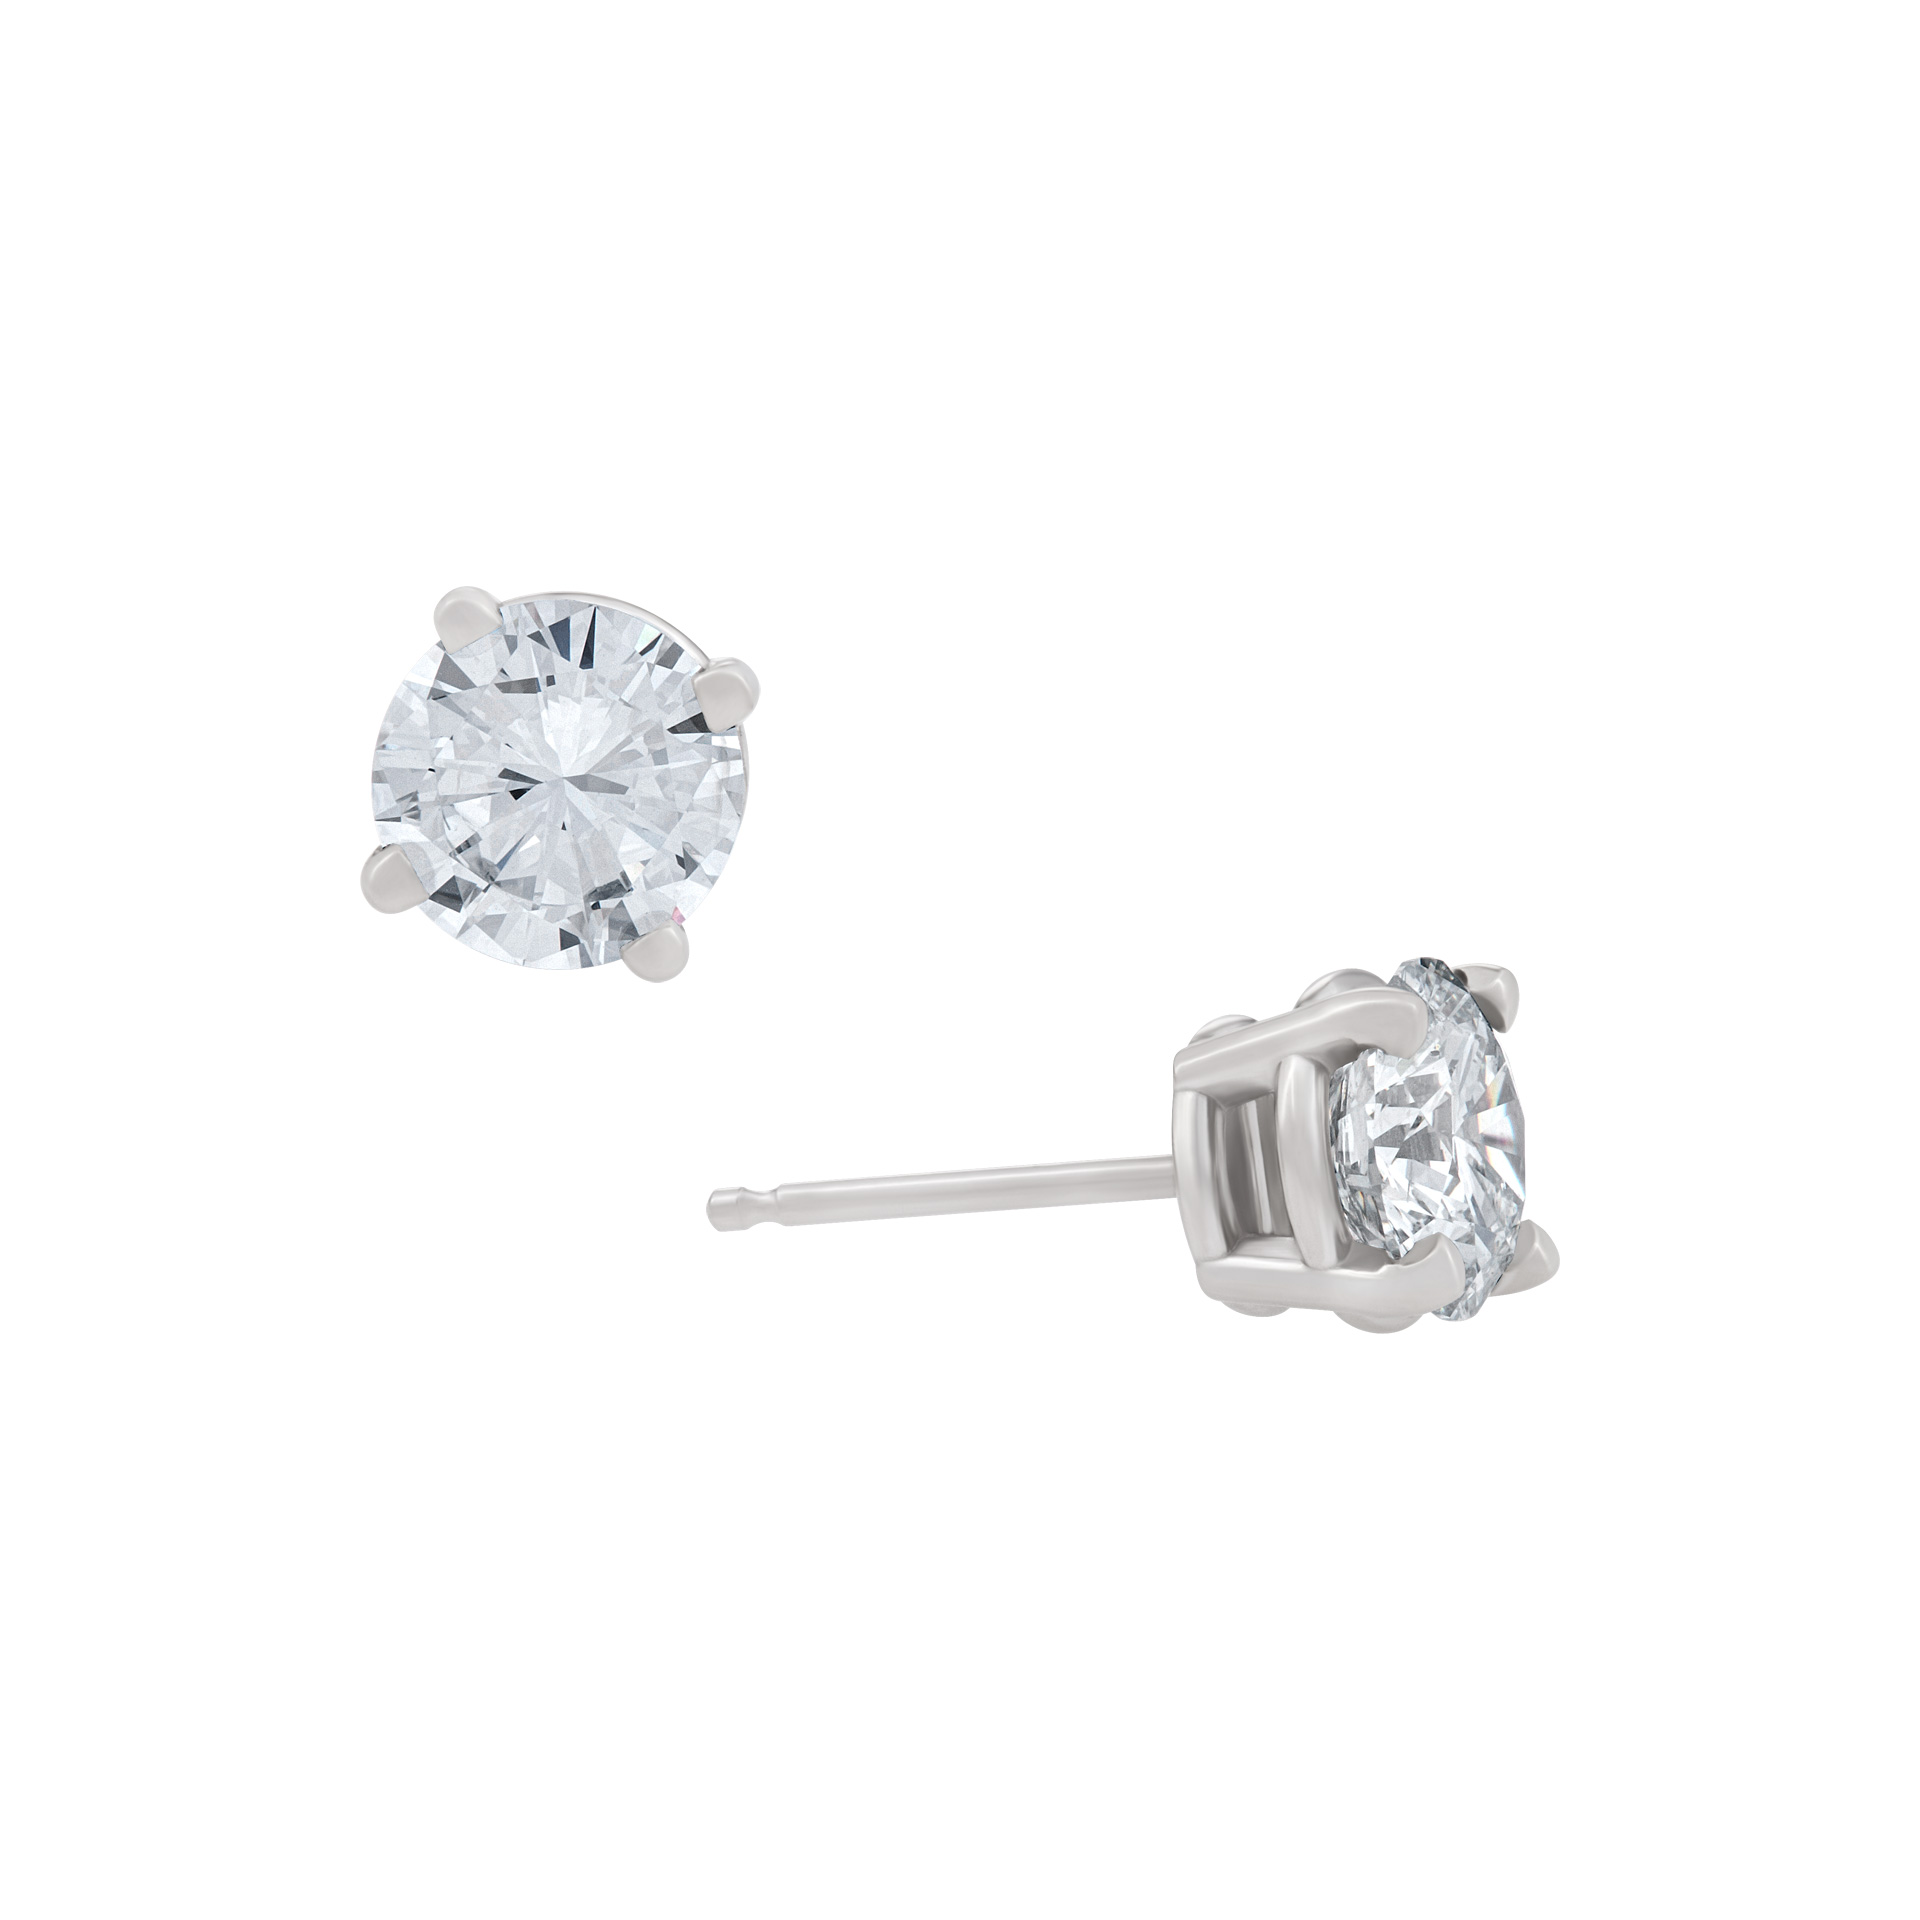 Gia Certified Diamond Studs .83cts G Color I-1 Clarity .82 D Color I-1 Clarity image 2